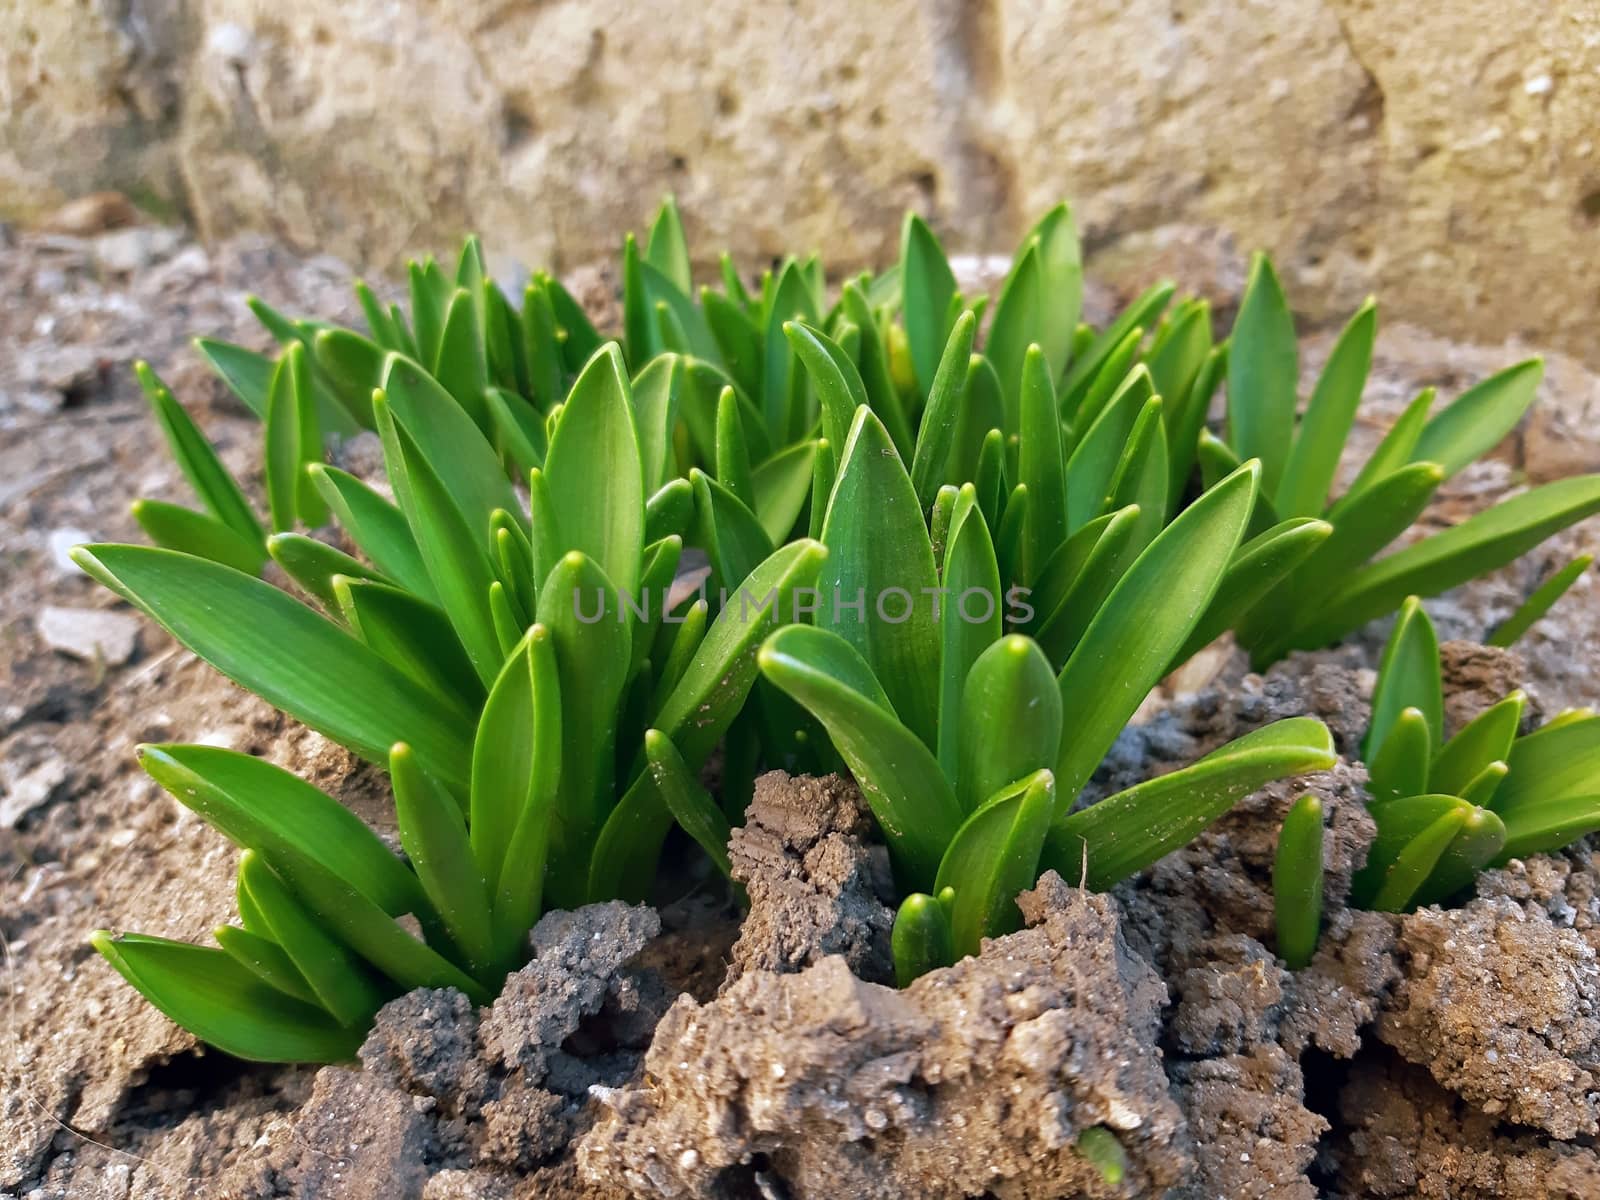 Hyacinth plants with fresh growths in the spring.